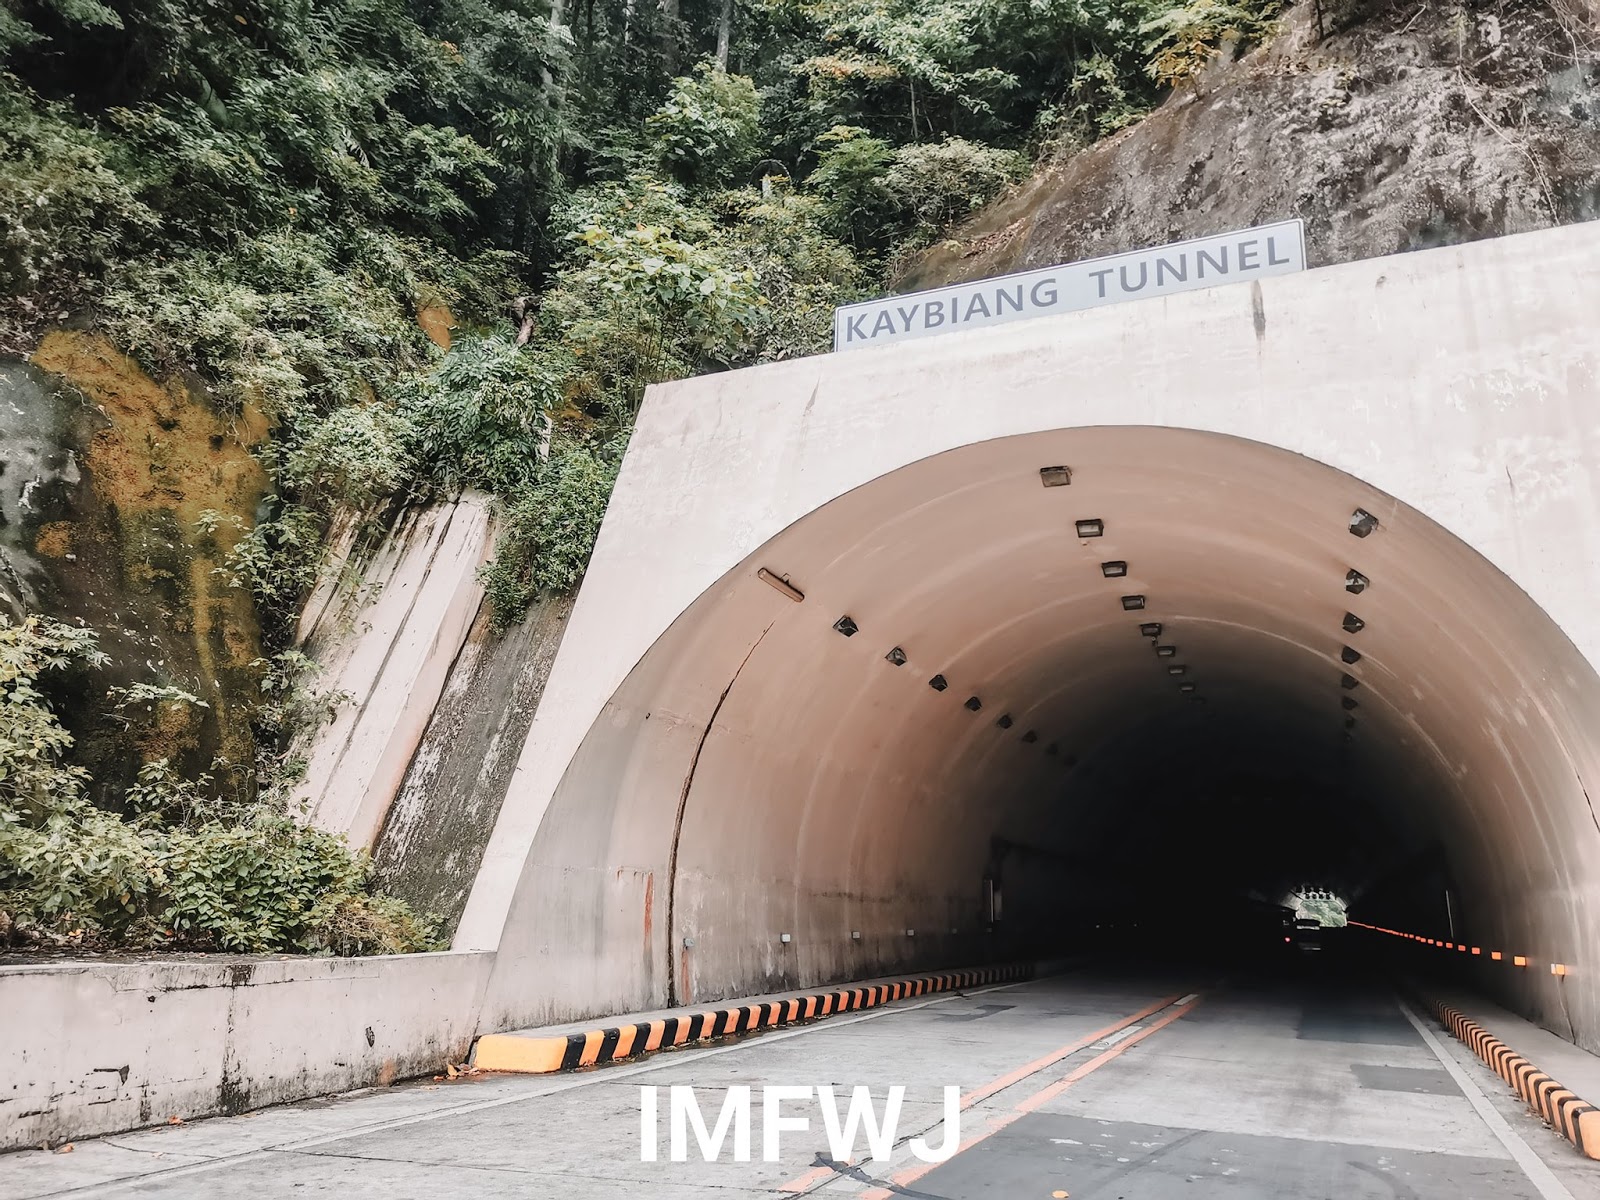 ROAD TRIP TO KAYBIANG TUNNEL: how to get there and things to do in